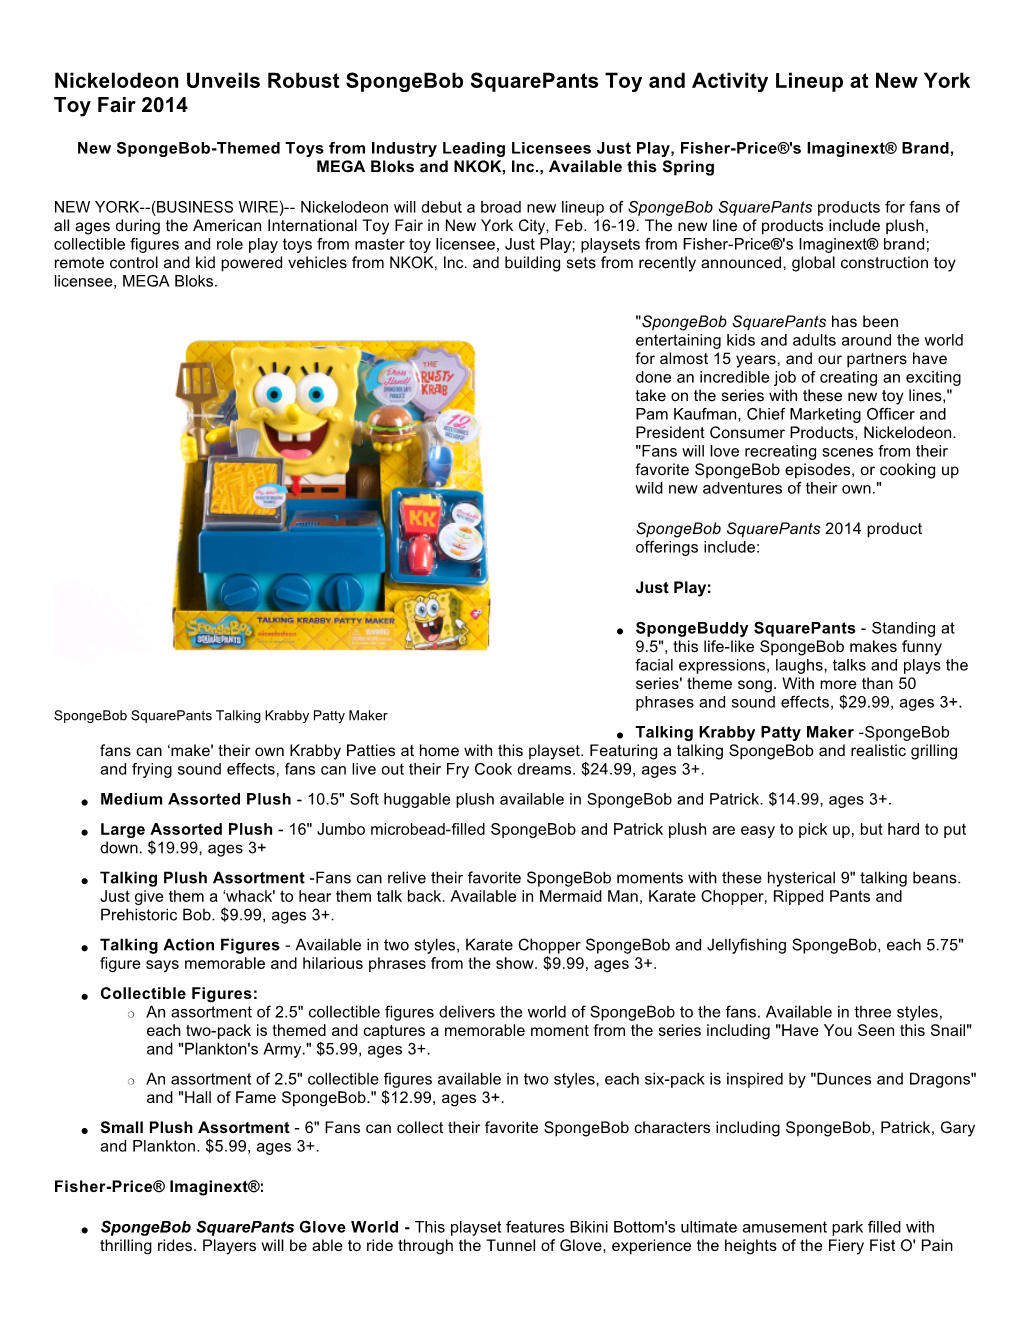 Nickelodeon Unveils Robust Spongebob Squarepants Toy and Activity Lineup at New York Toy Fair 2014